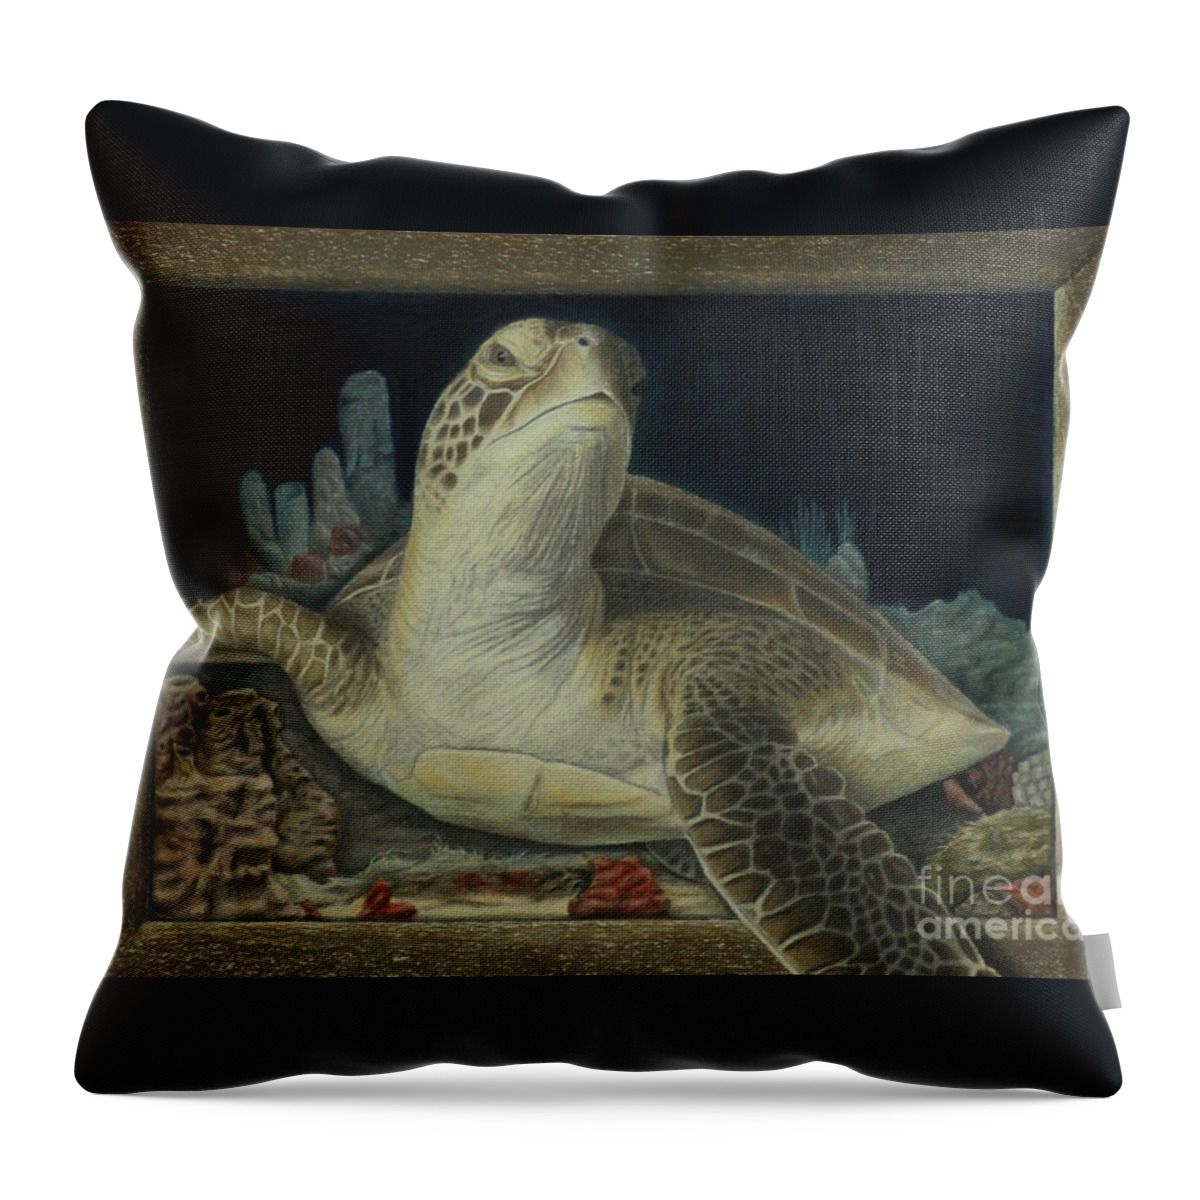 Colored Pencil Throw Pillow featuring the painting Sea Turtle by Jennifer Watson